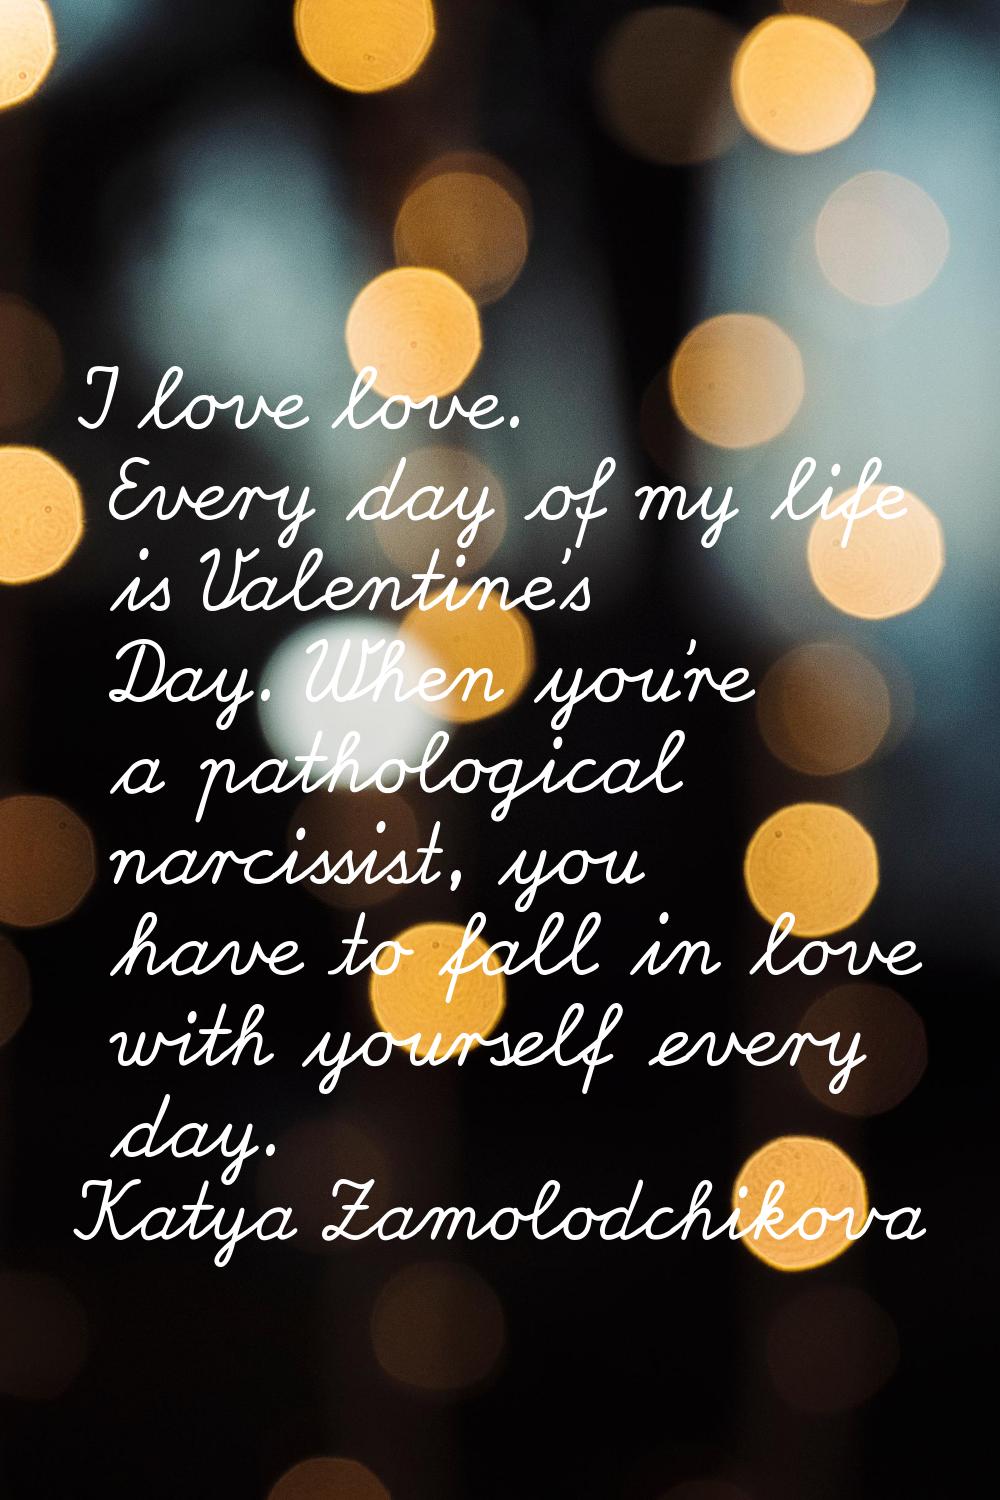 I love love. Every day of my life is Valentine's Day. When you're a pathological narcissist, you ha